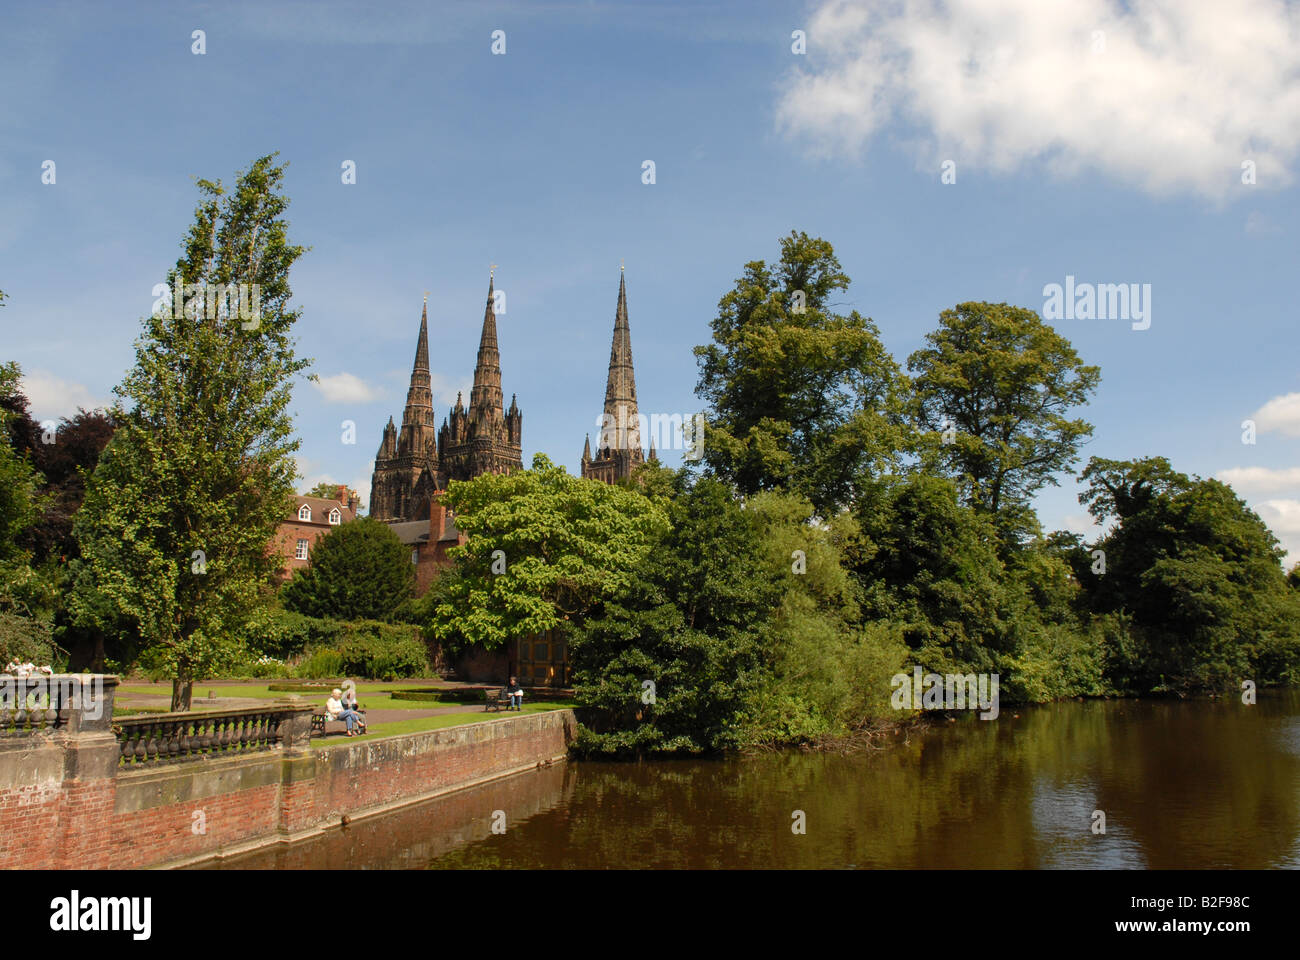 The three spires of Lichfield Cathedral in Staffordshire England Stock Photo